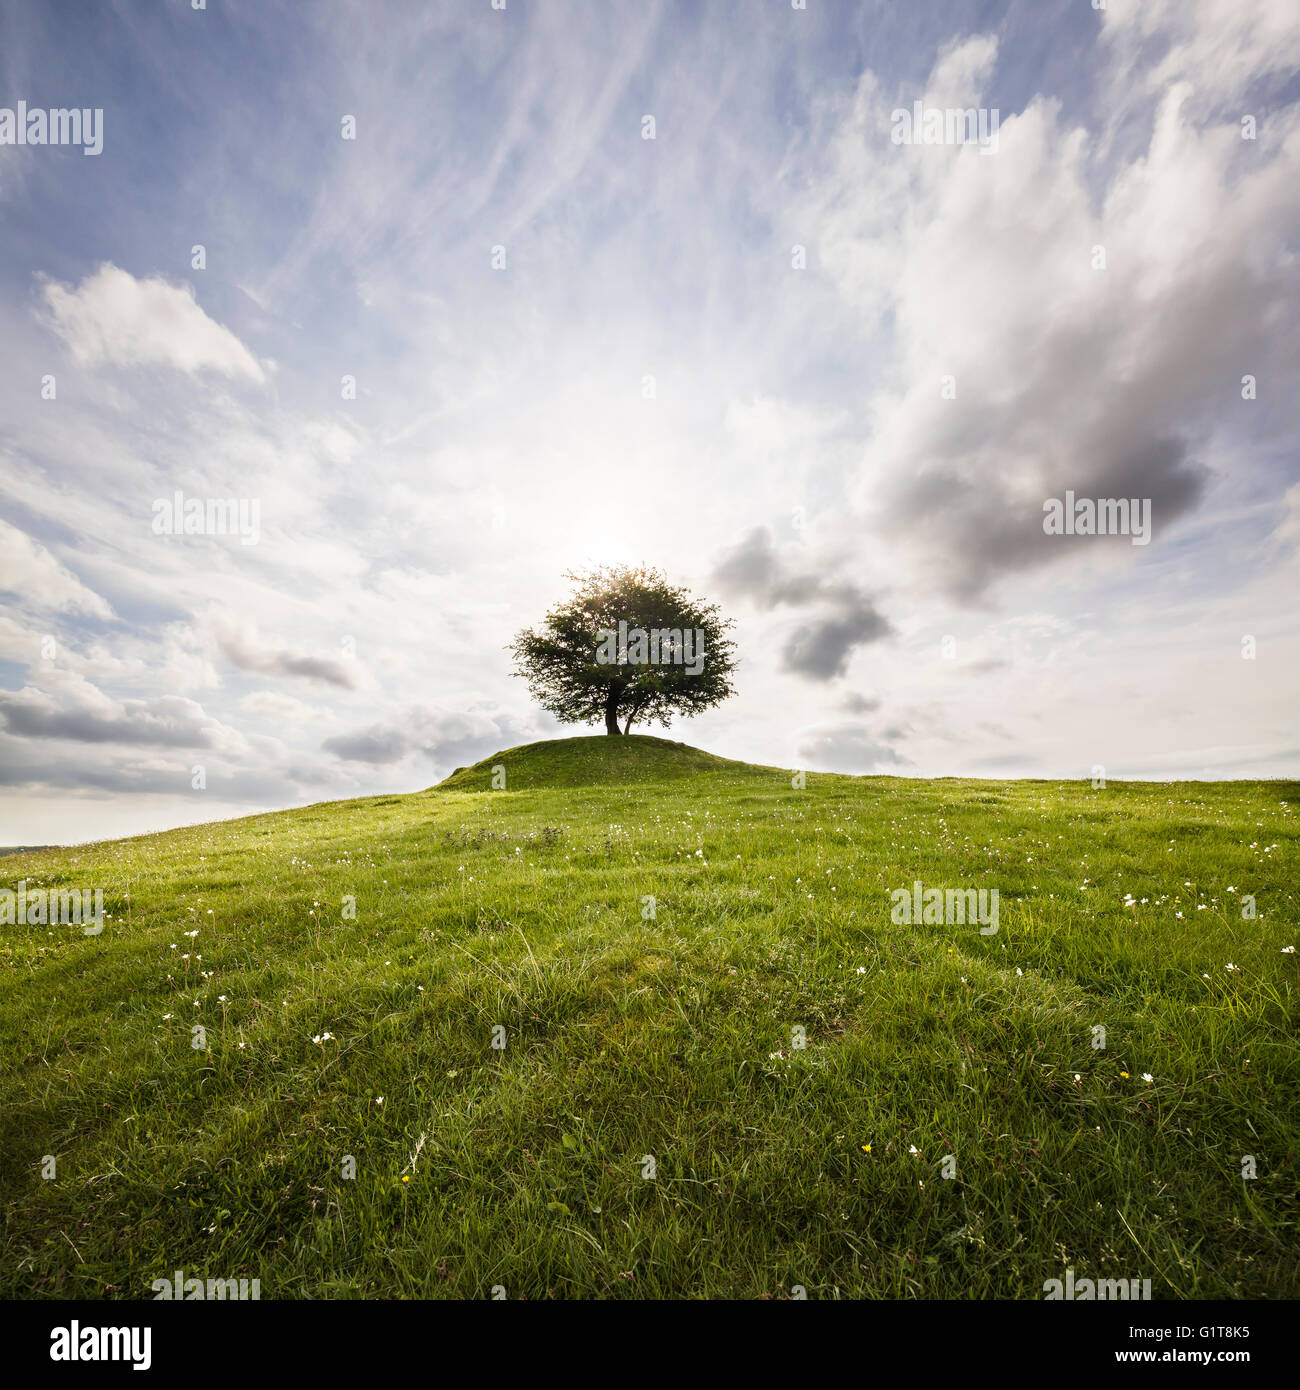 Lonely tree on a hill against the sun with a dramatic sky. Osterlen, Skane / Scania, Sweden. Scandinavia. Stock Photo